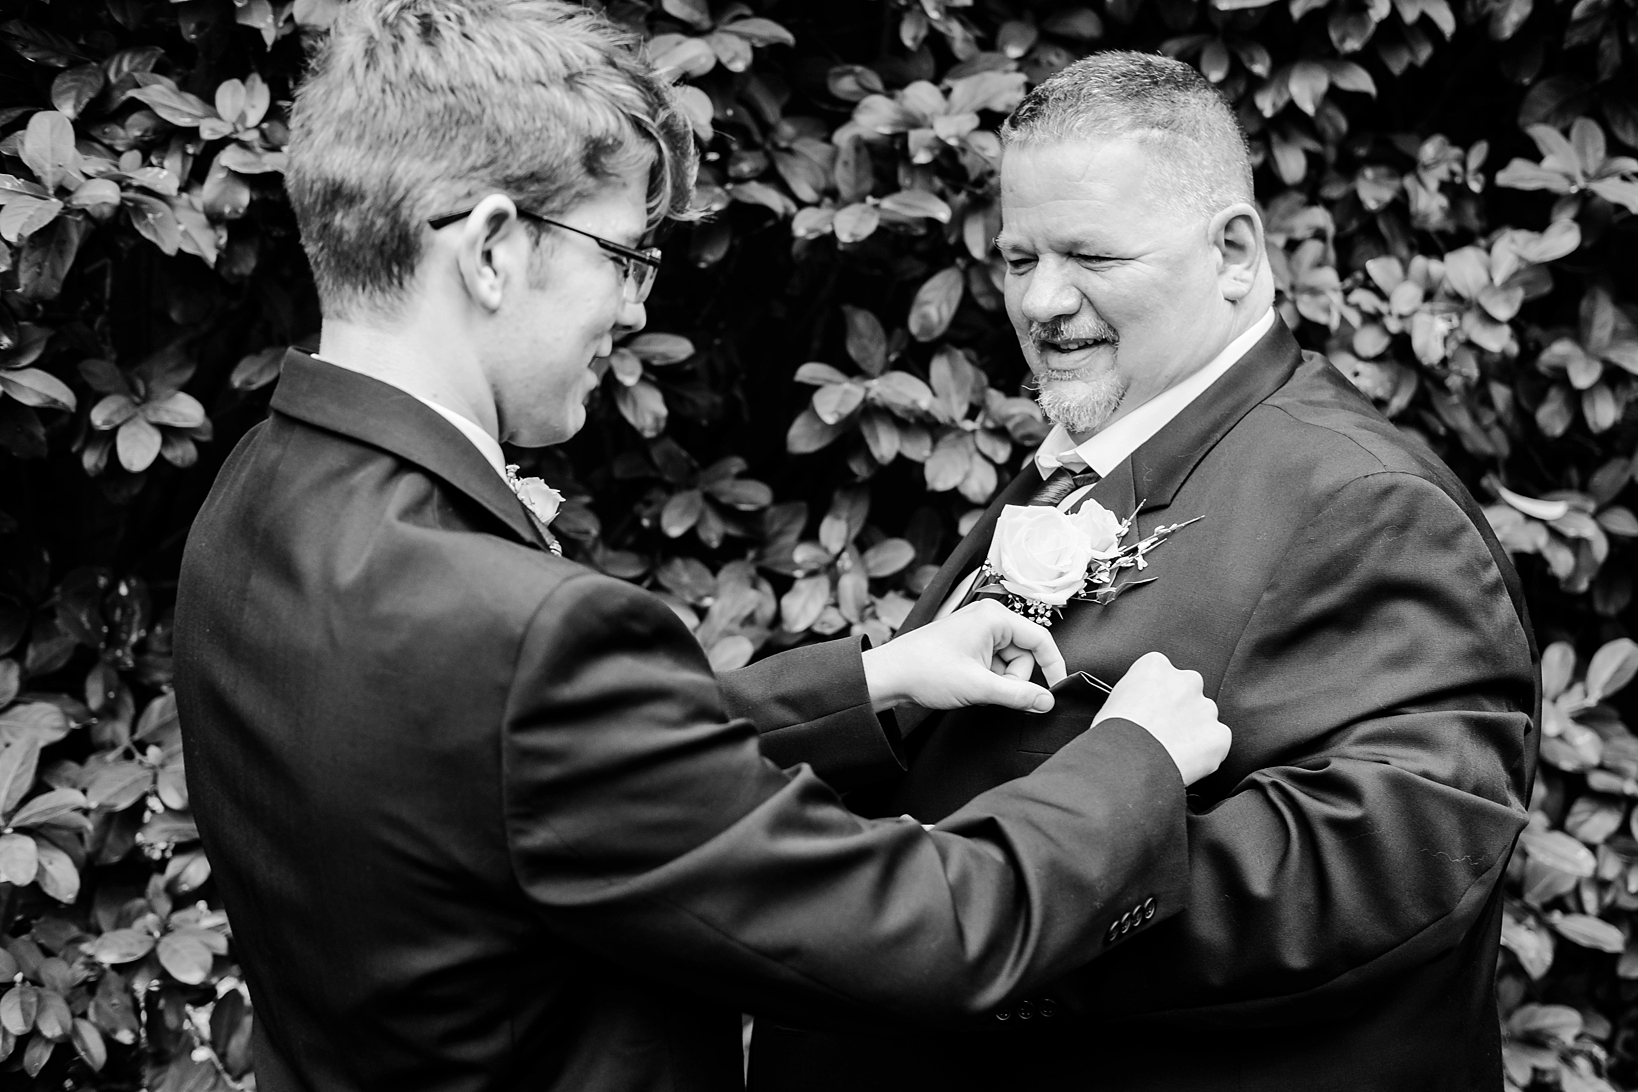 Groom having his pocket square adjusted by his Son before his cross creek wedding celebration